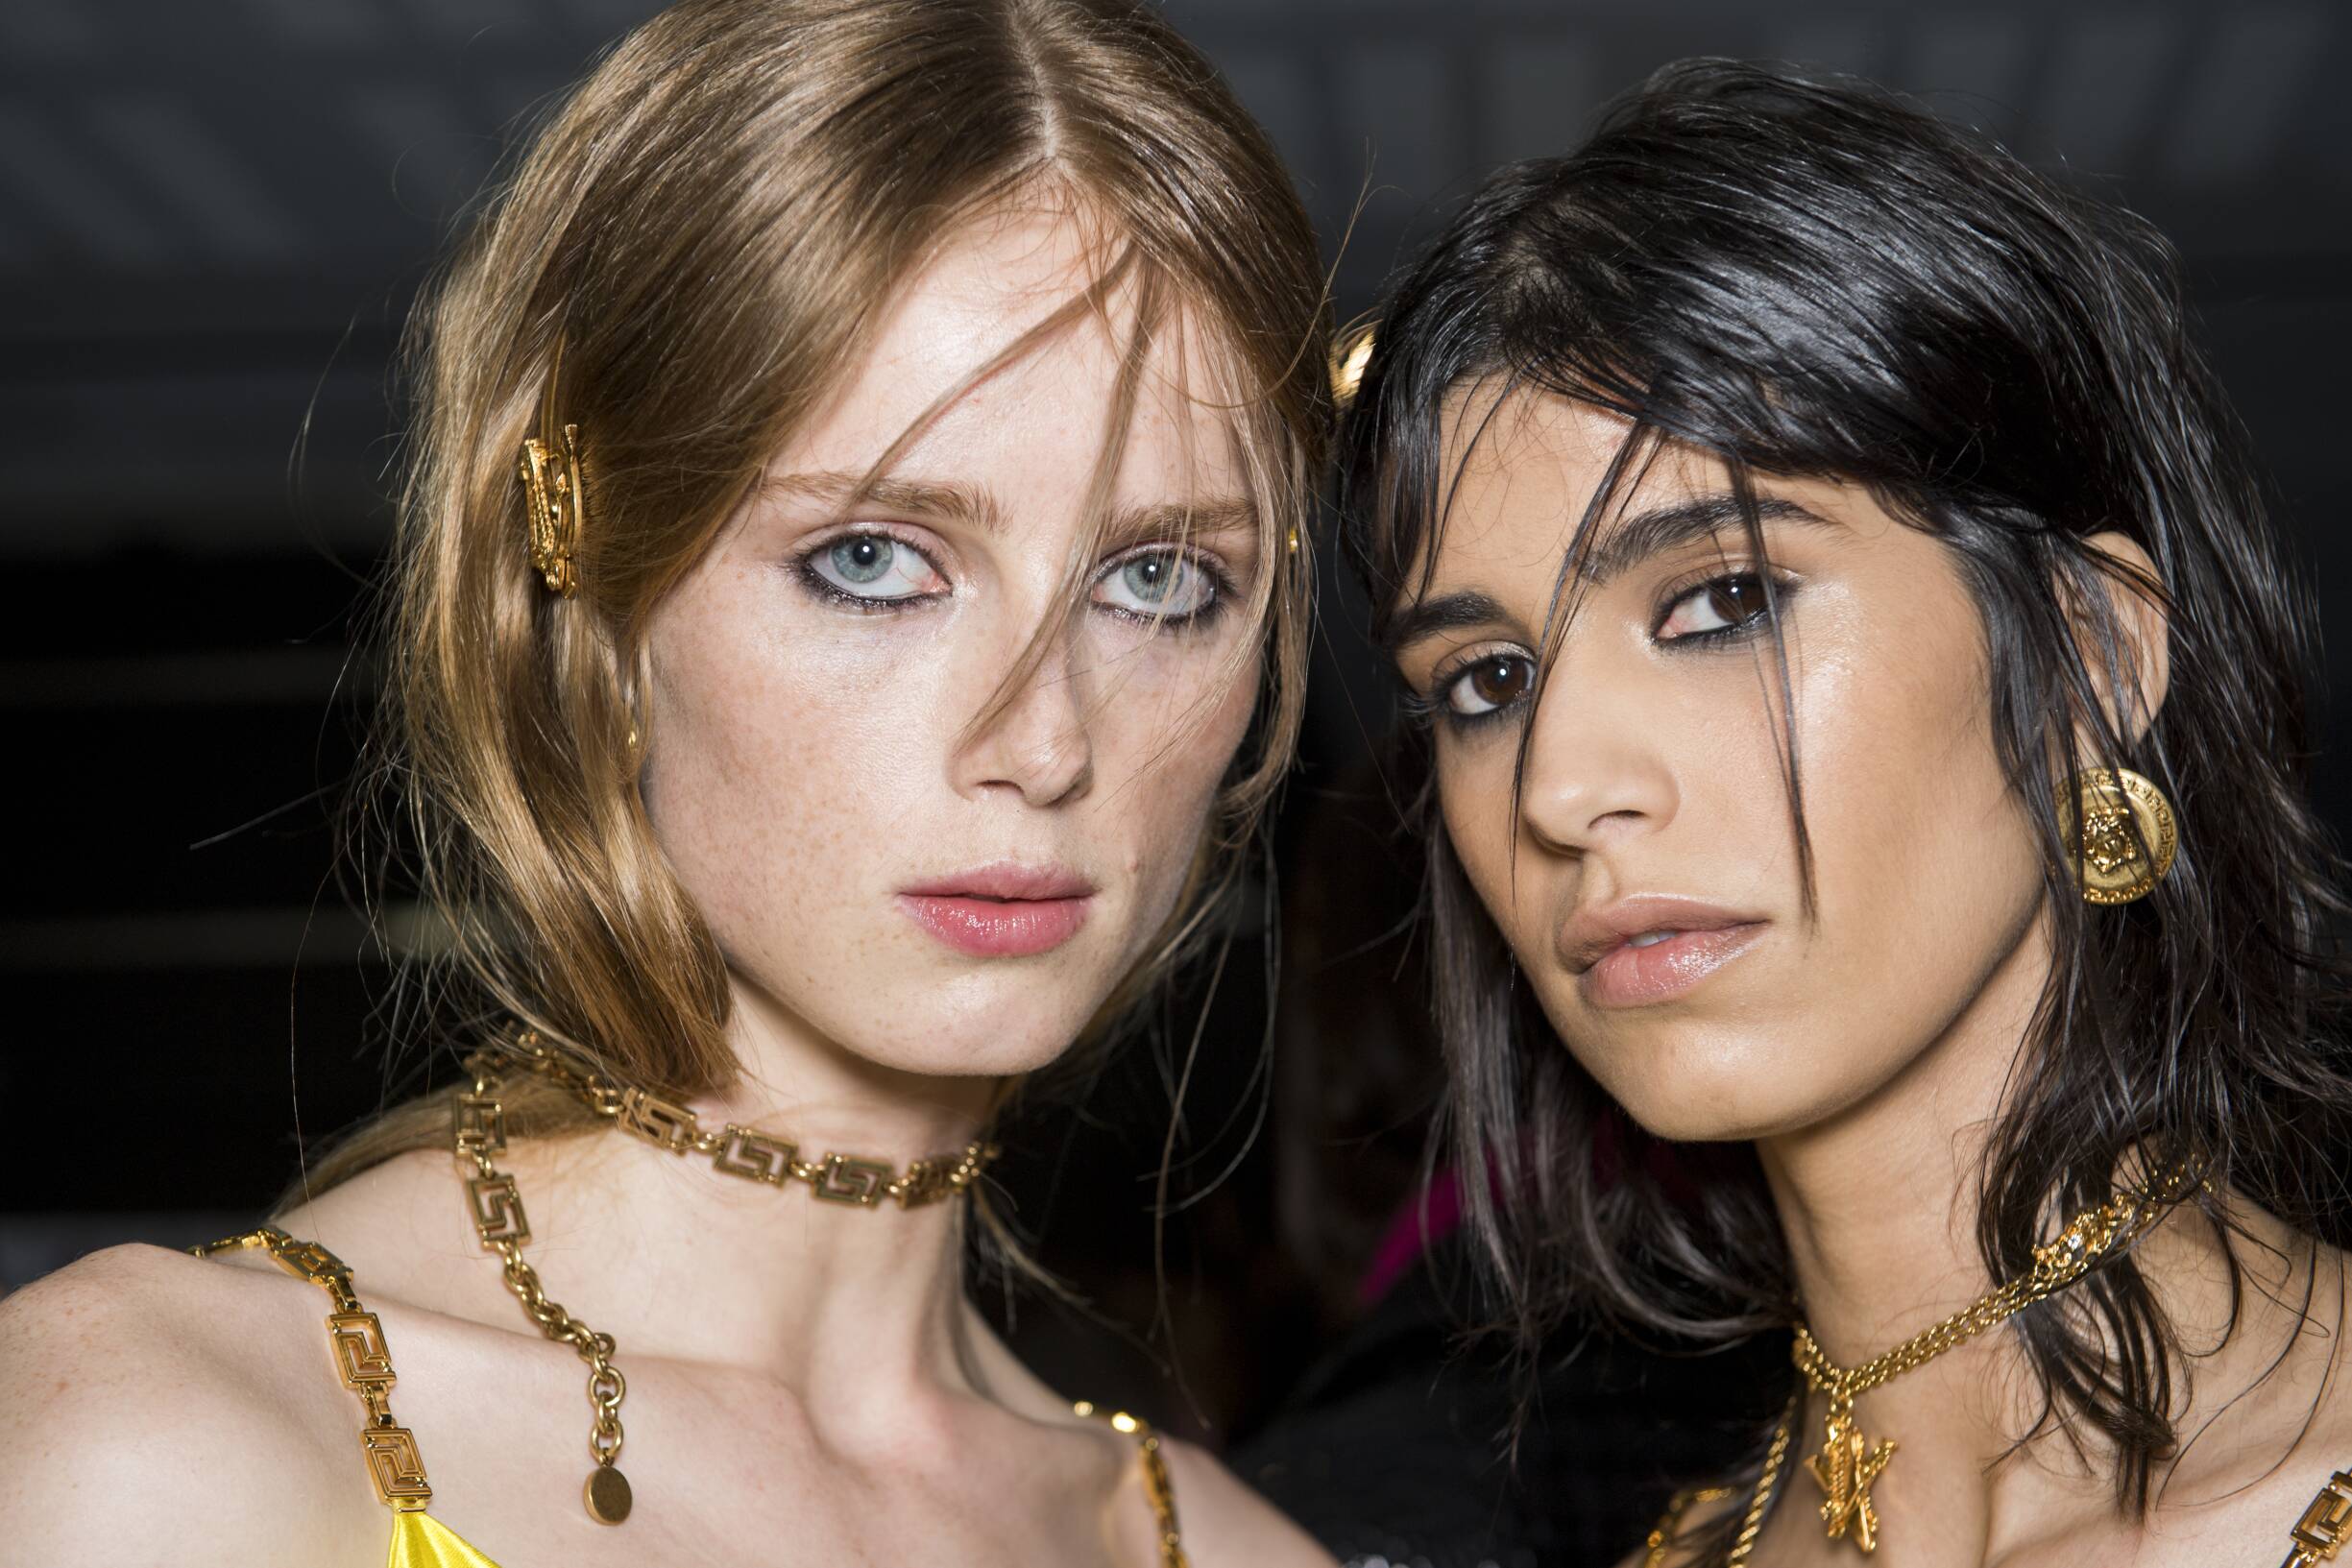 Backstage Versace Models 2019 Fall Winter 2019 Collection